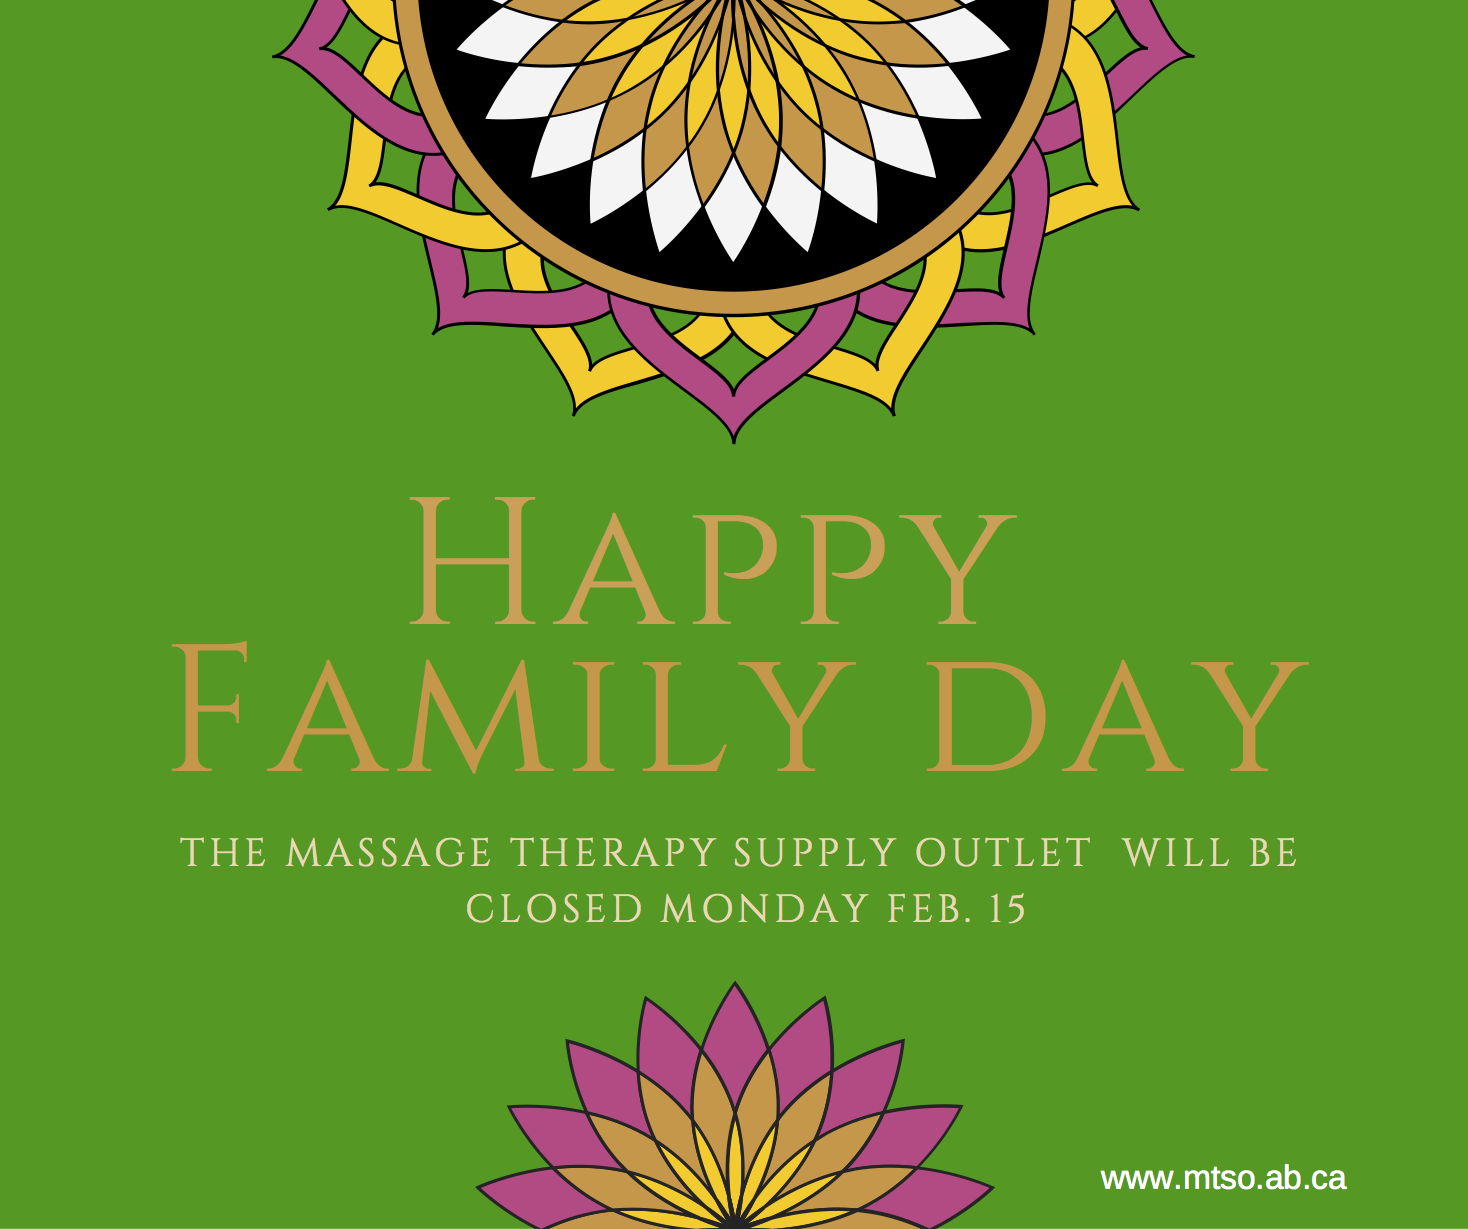 Closed for Family Day Monday Feb. 15